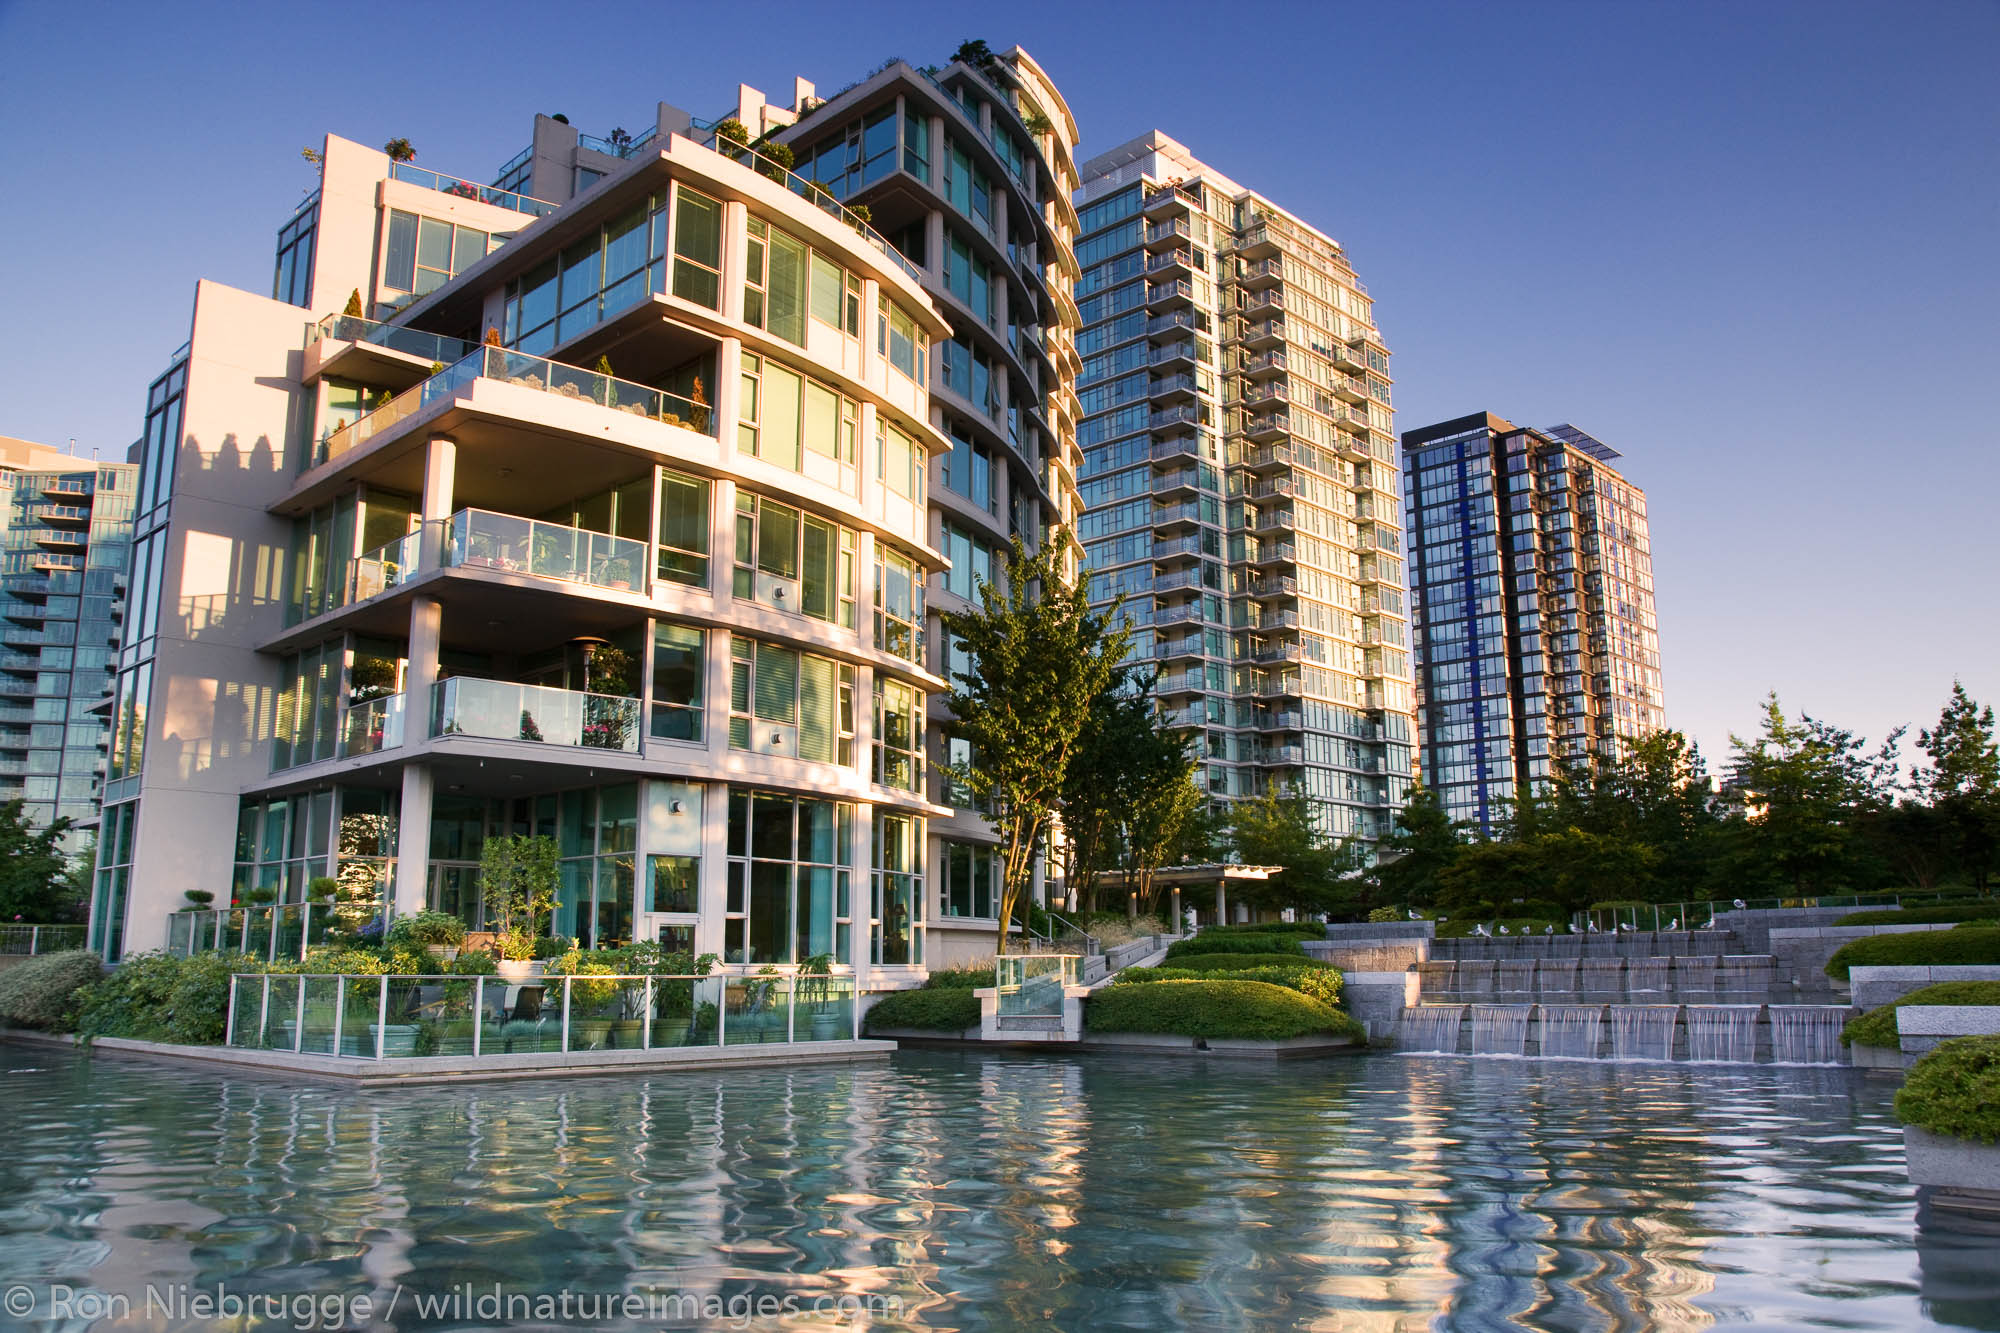 Residential buildings along the waterfront, downtown Vancouver, British Columbia, Canada.